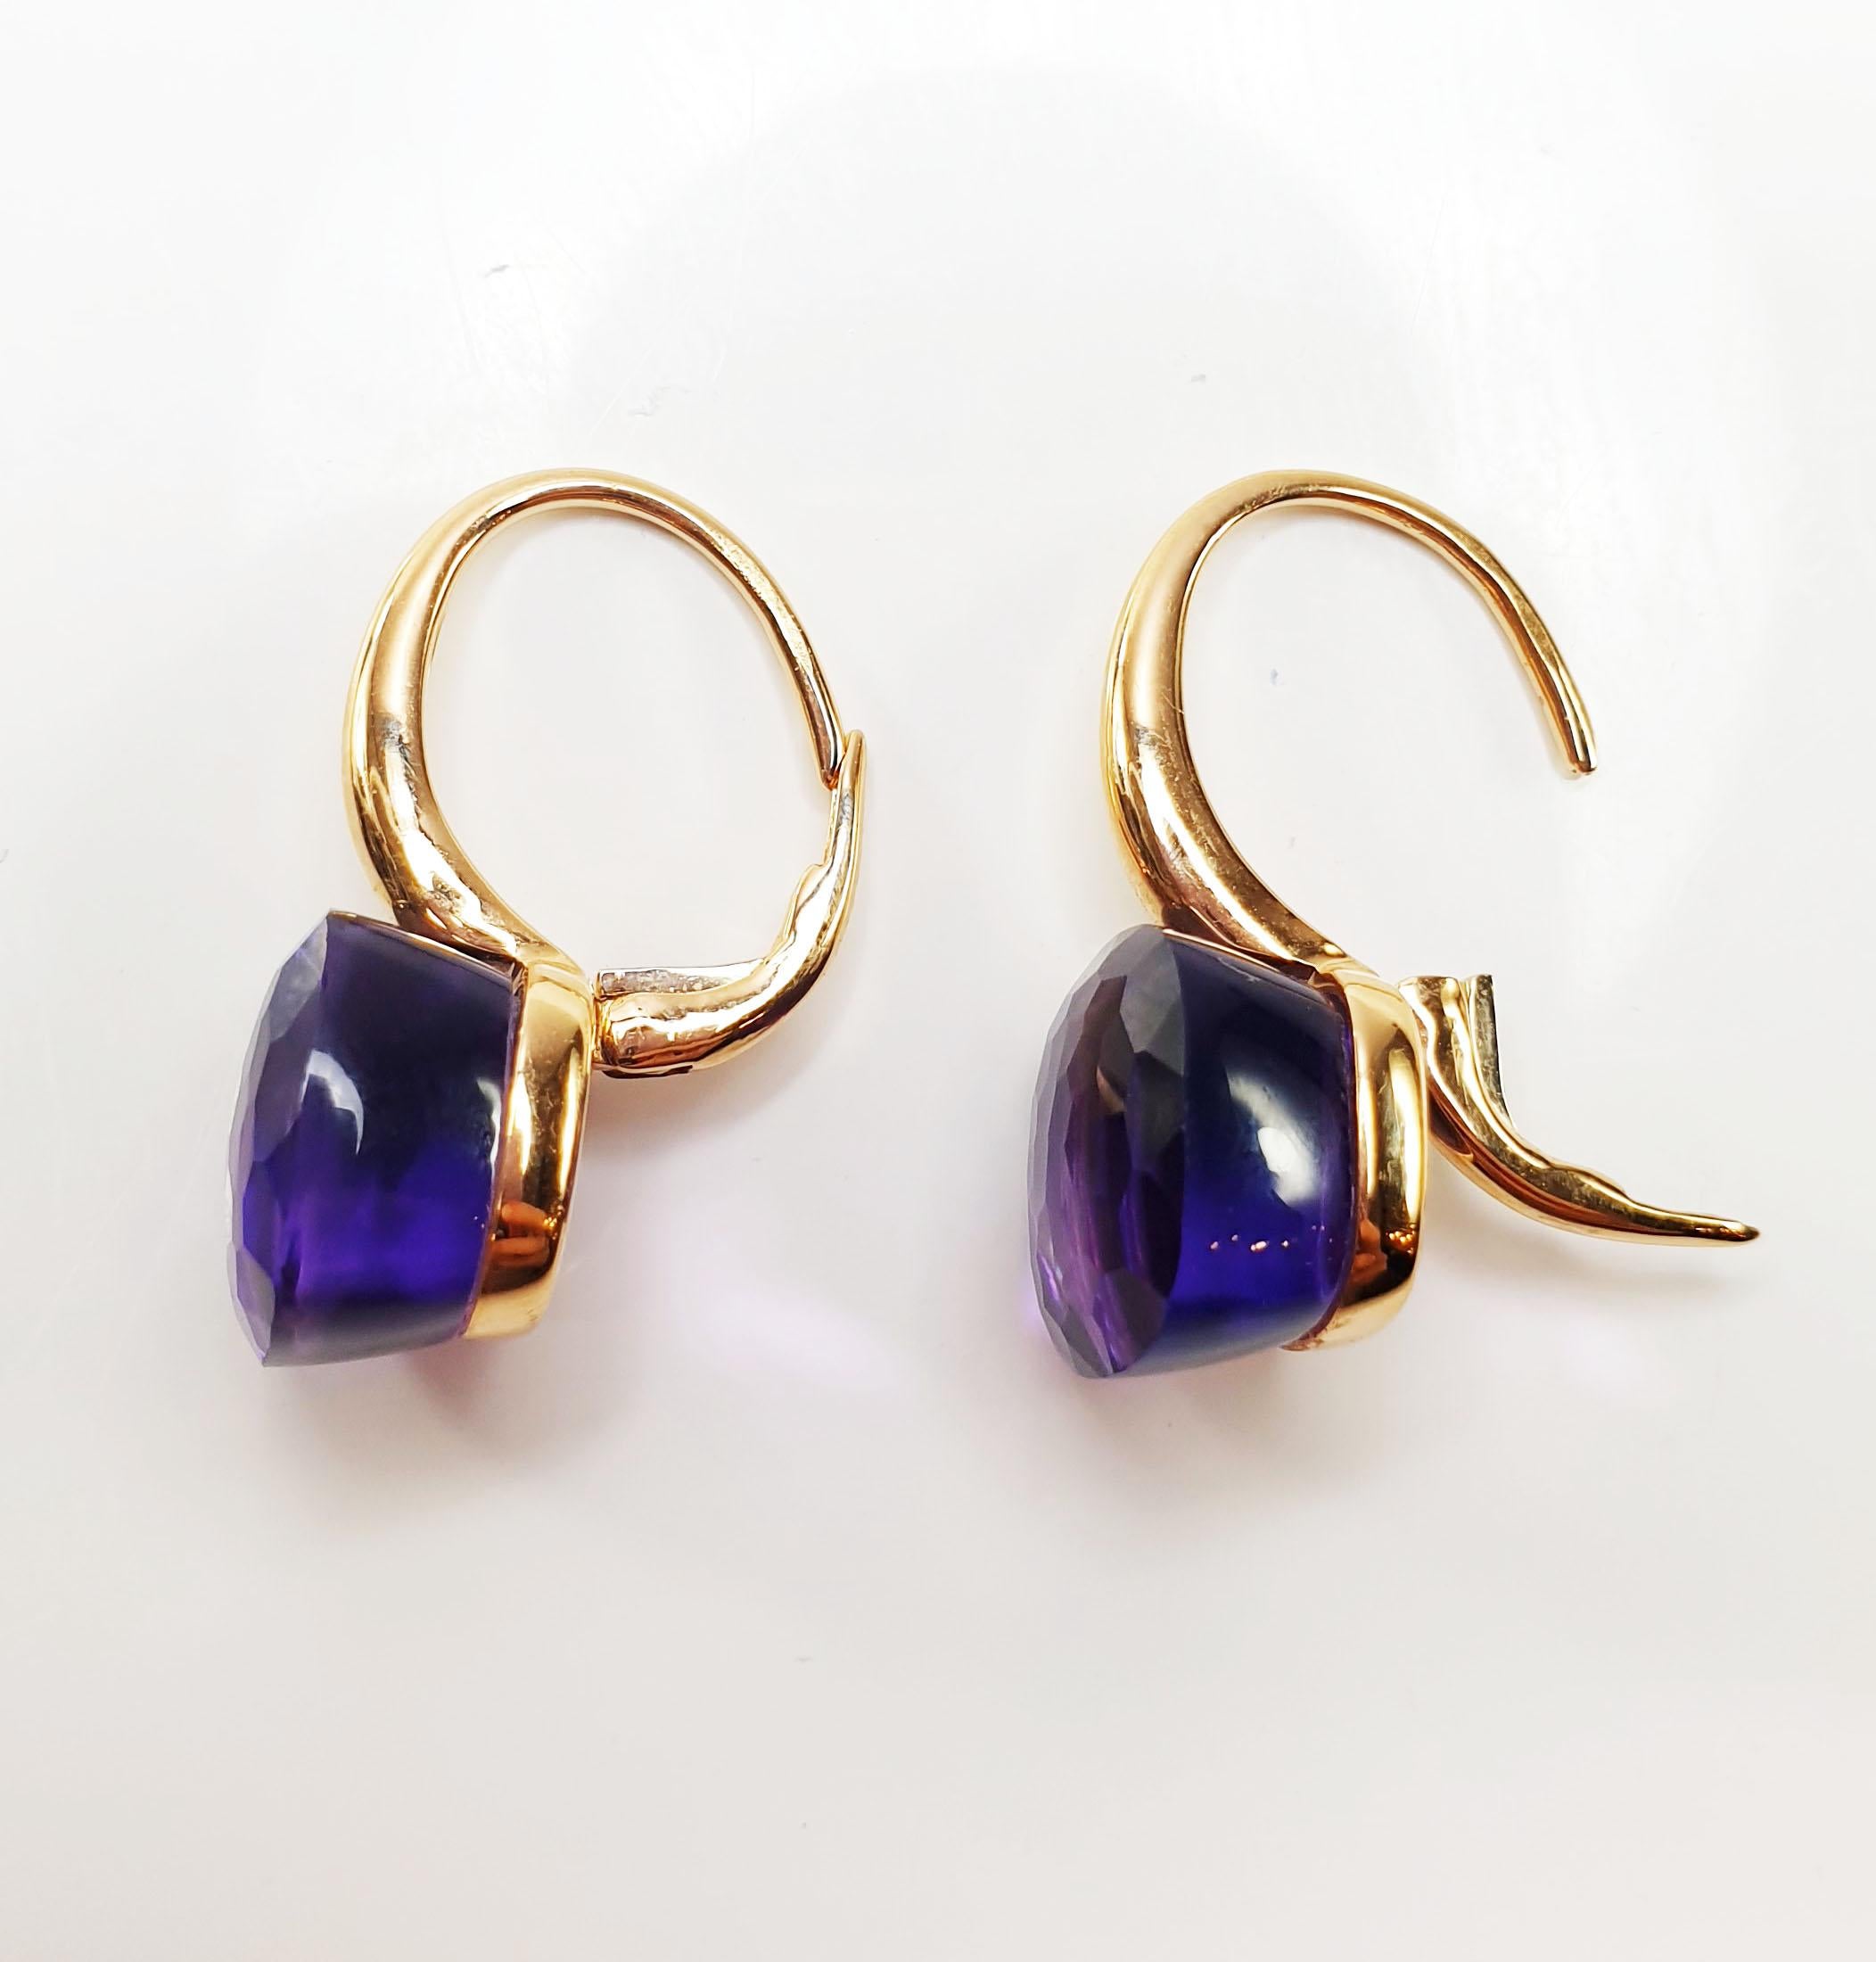 This pair of earrings weight total 5.9gr and measure 22mm or 0.75 inches
Amethyst are 4,00ct each 
Also available in Green Quartz, Milky Quartz, citrine Quartz, prasolite, rose quartz,  topaz
Please note that carat weights may slightly vary as each